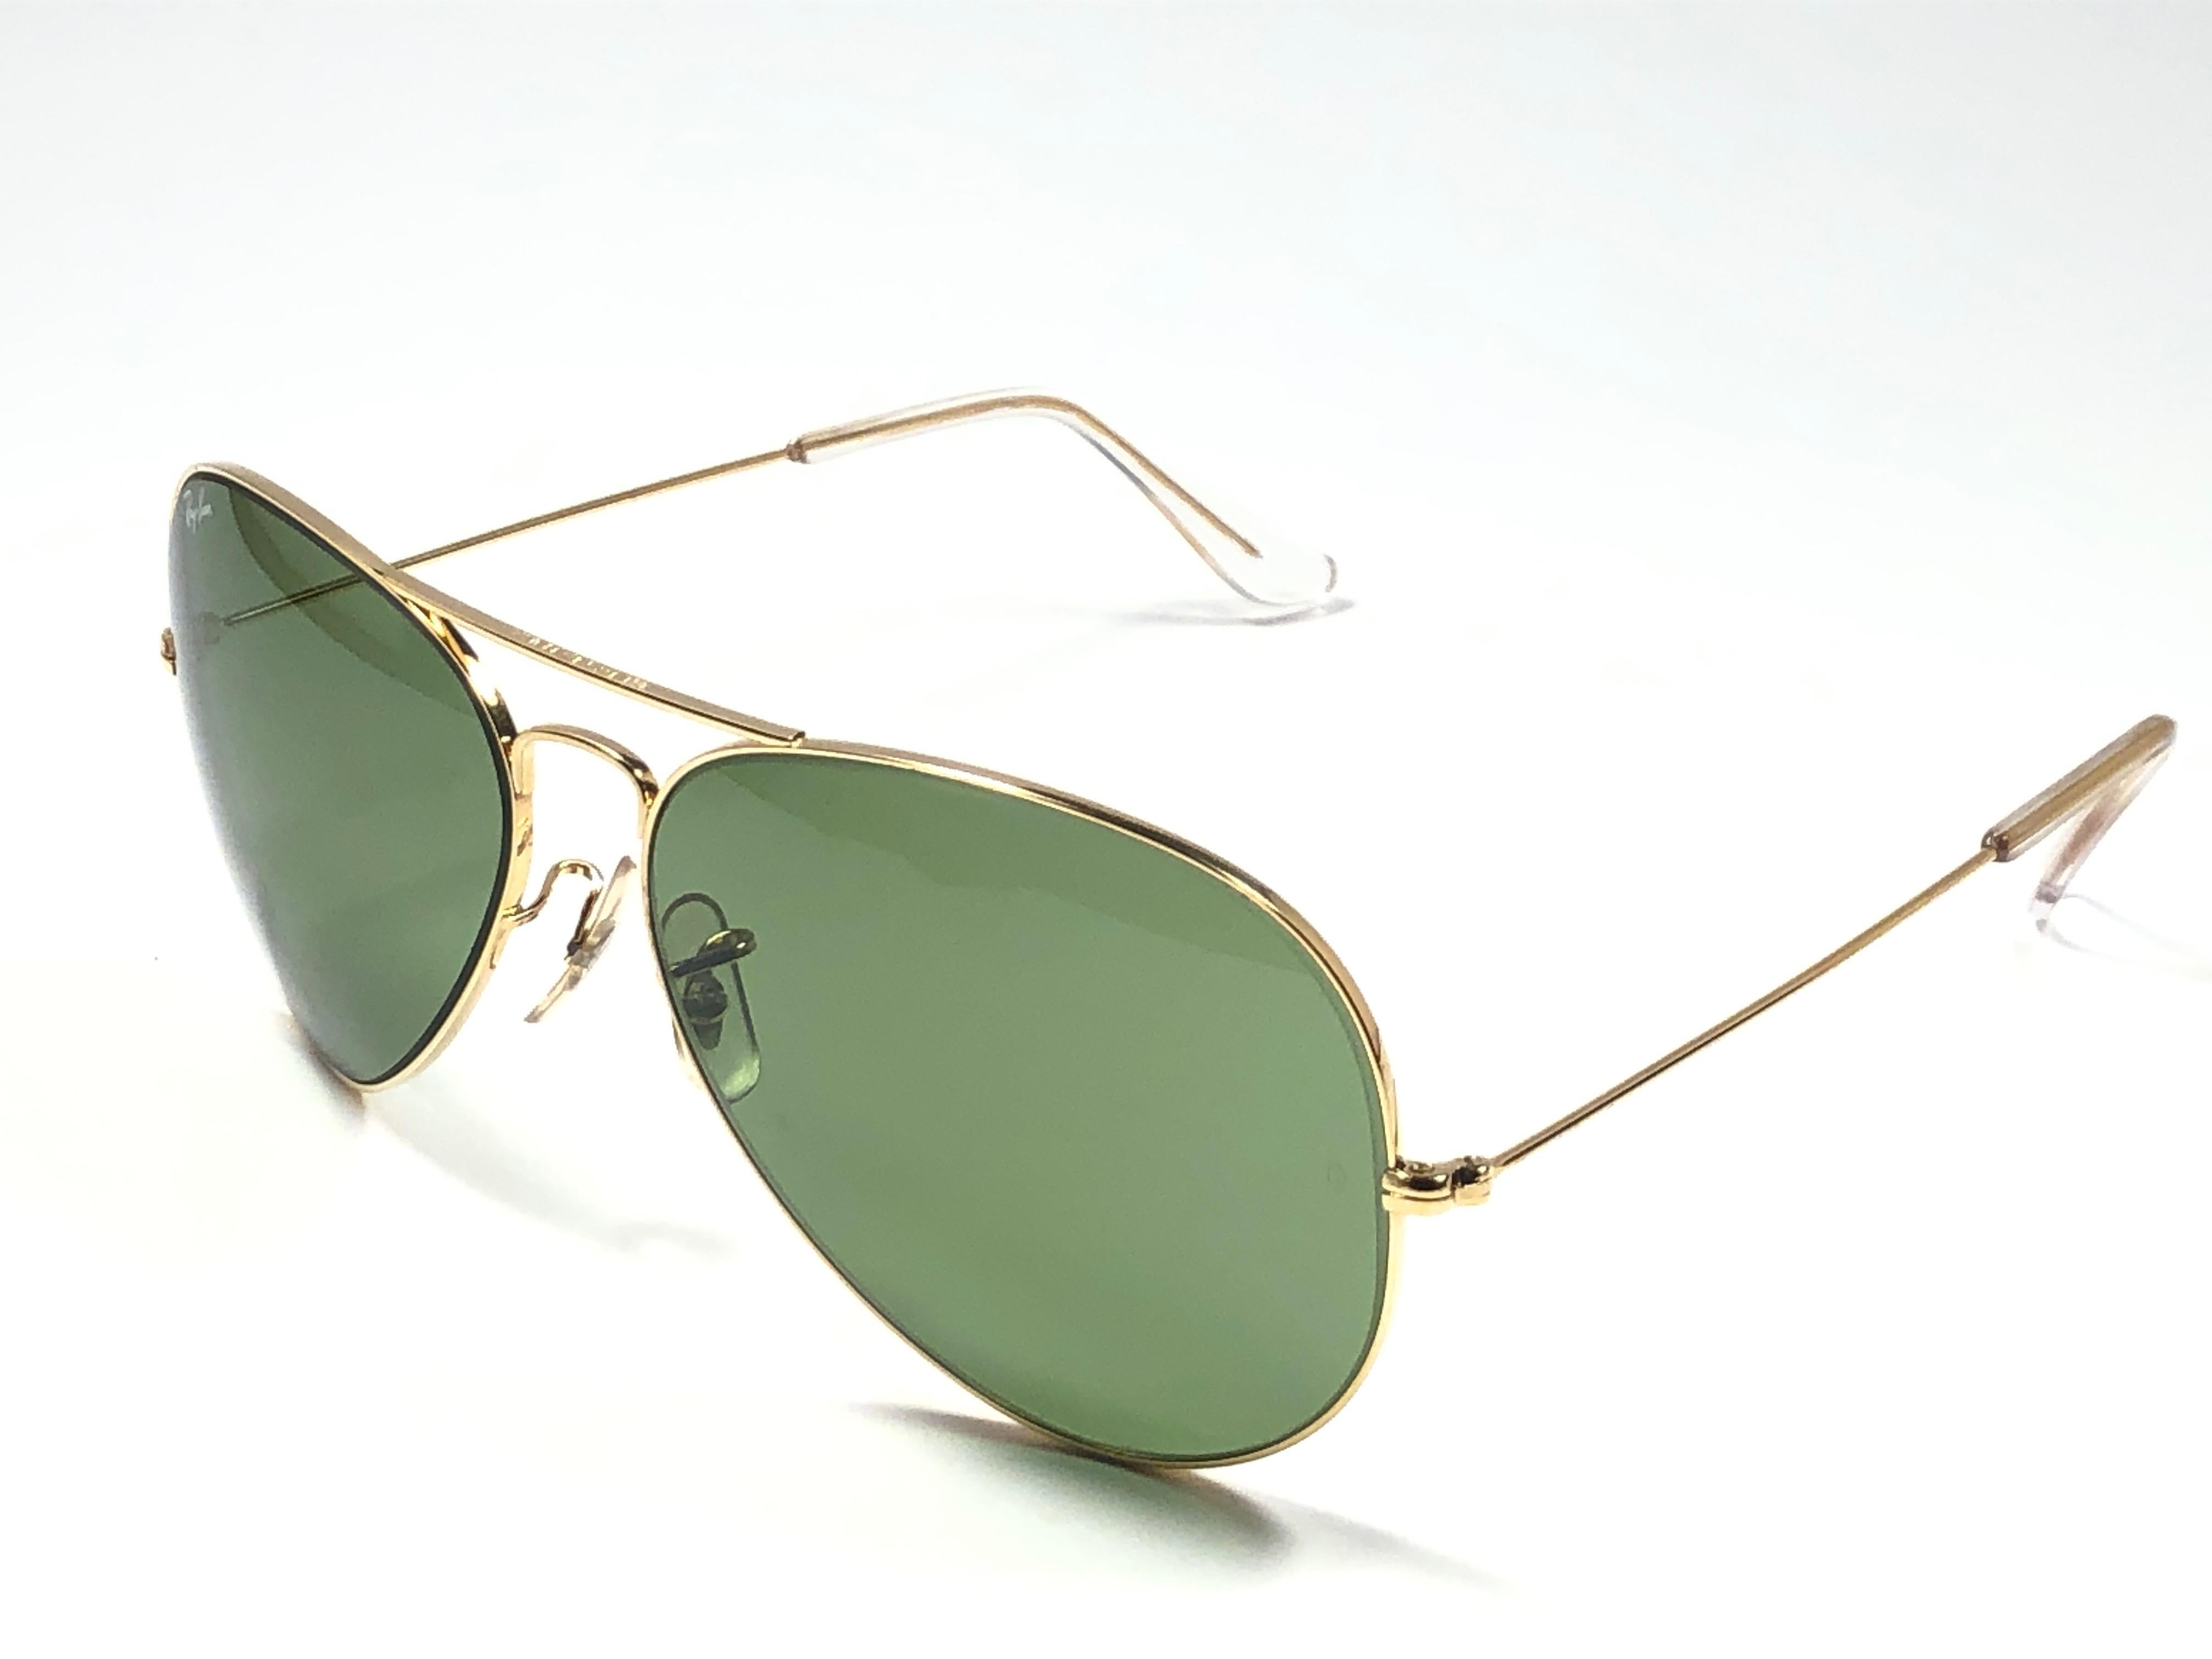 Vintage Ray Ban Aviator gold 62MM largest available with RB3 Green Lenses.


Light sign of wear due to storage. Original Ray Ban B&L case.